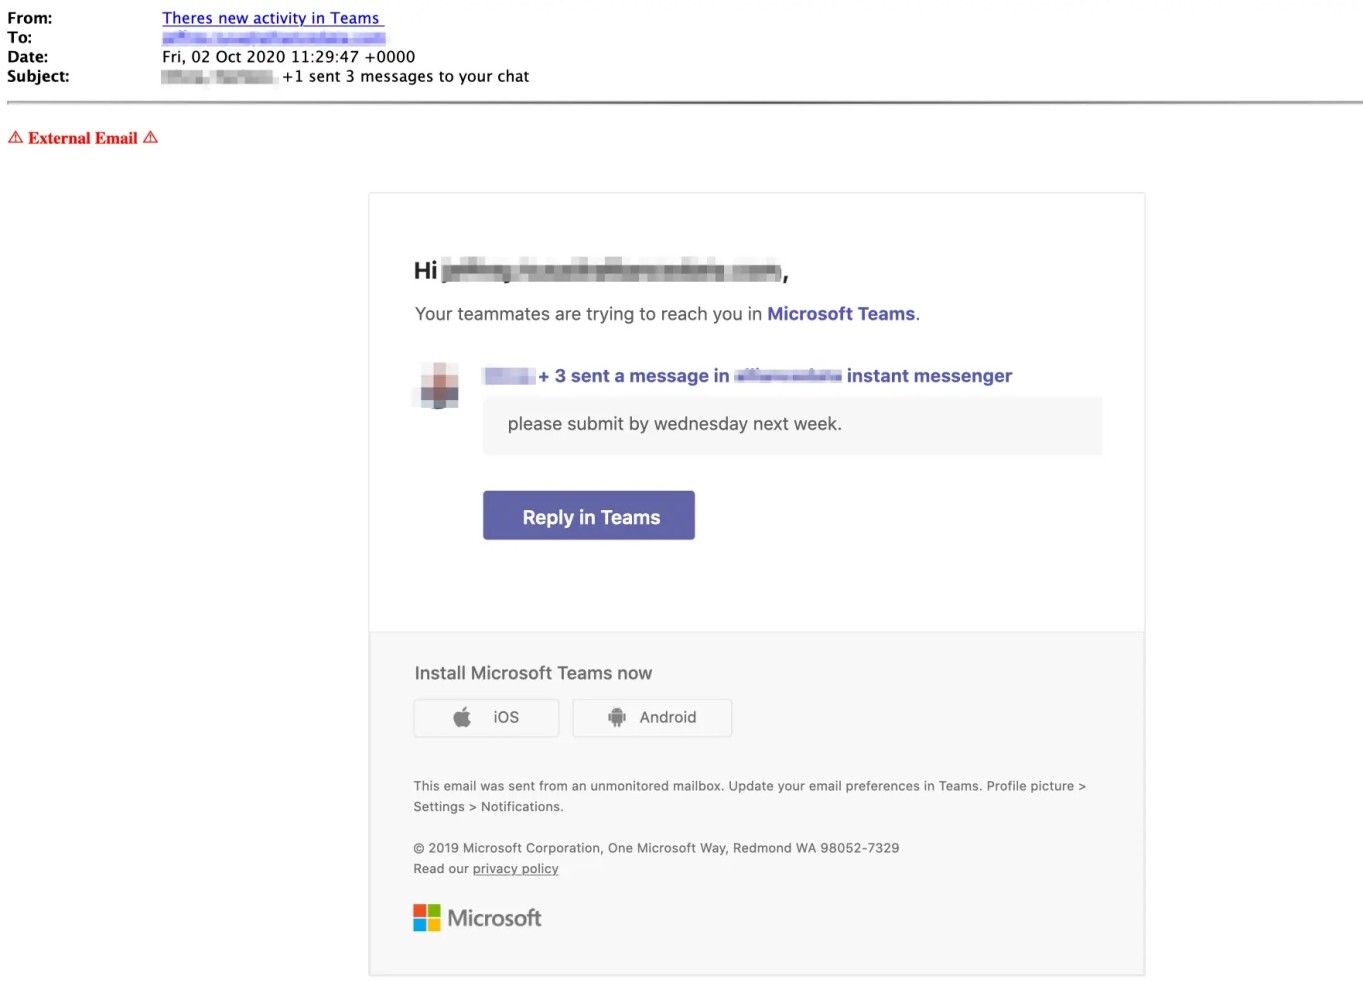 An example of Microsoft impersonation